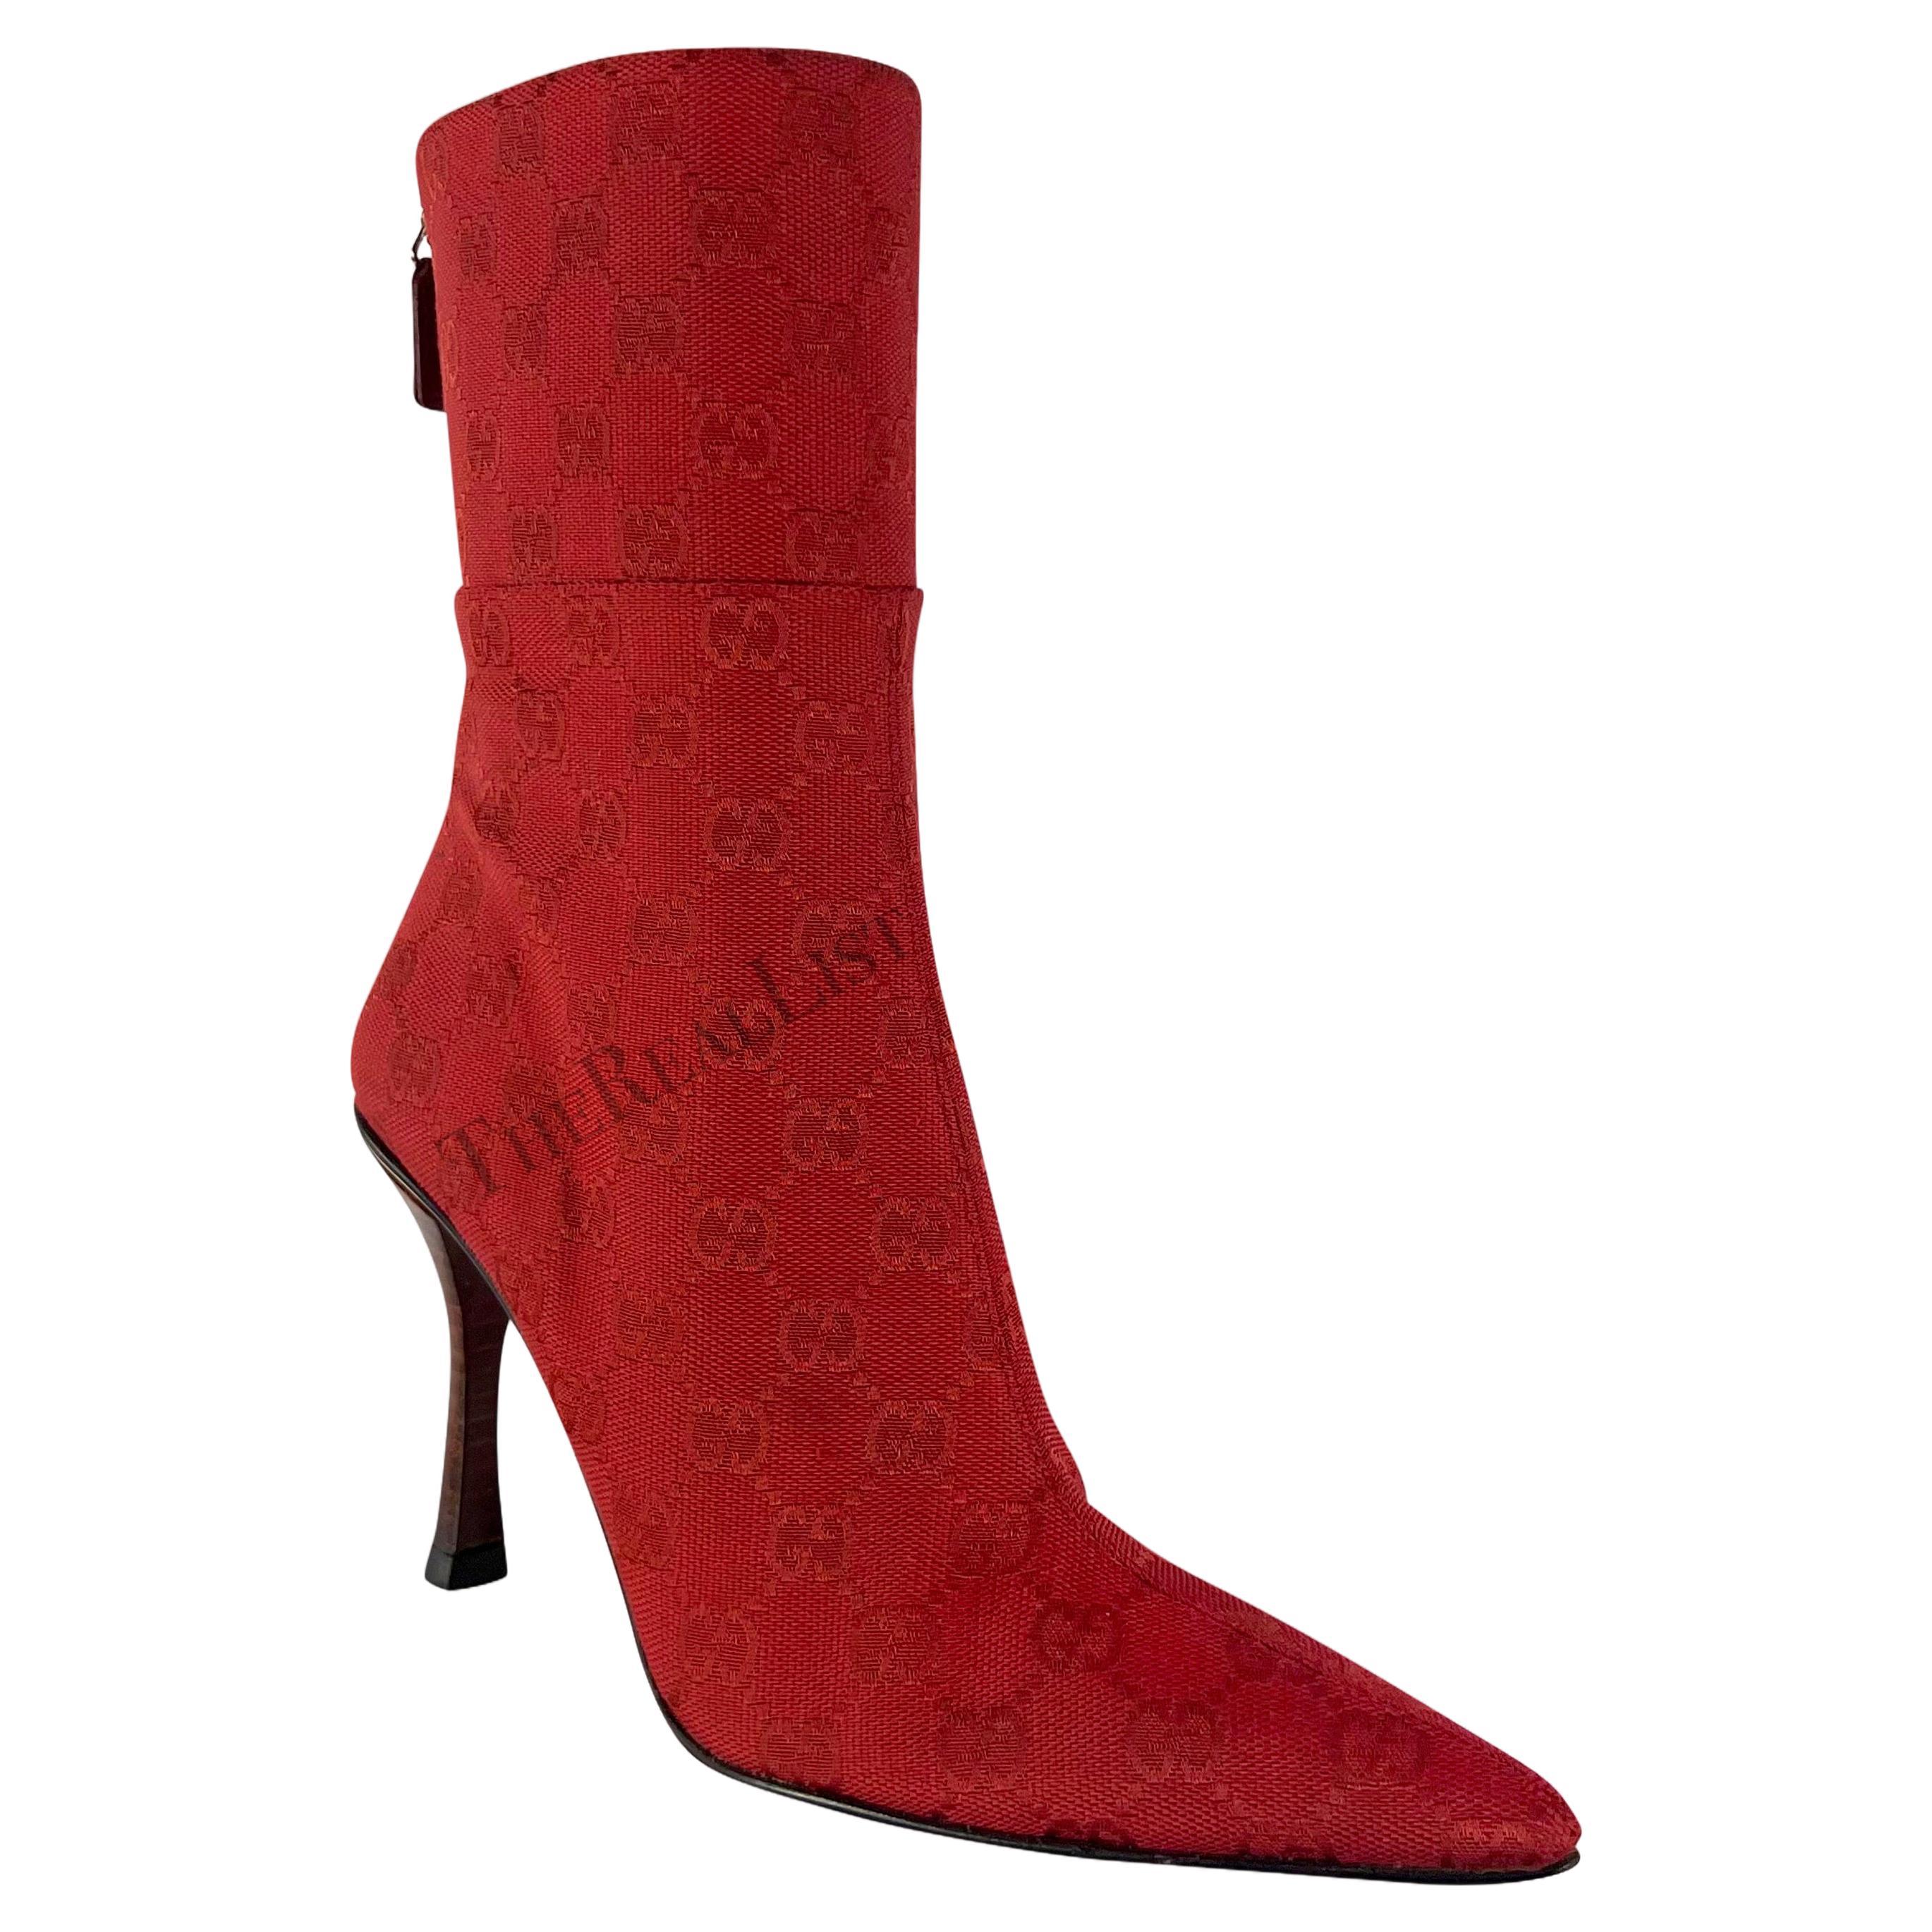 Presenting a pair of bright red canvas Gucci heeled boots, designed by Tom Ford. From the early 2000s, these heeled booties feature a pointed toe and are constructed entirely of Gucci 'GG' monogrammed canvas. 

Approximate measurements: 
Size -